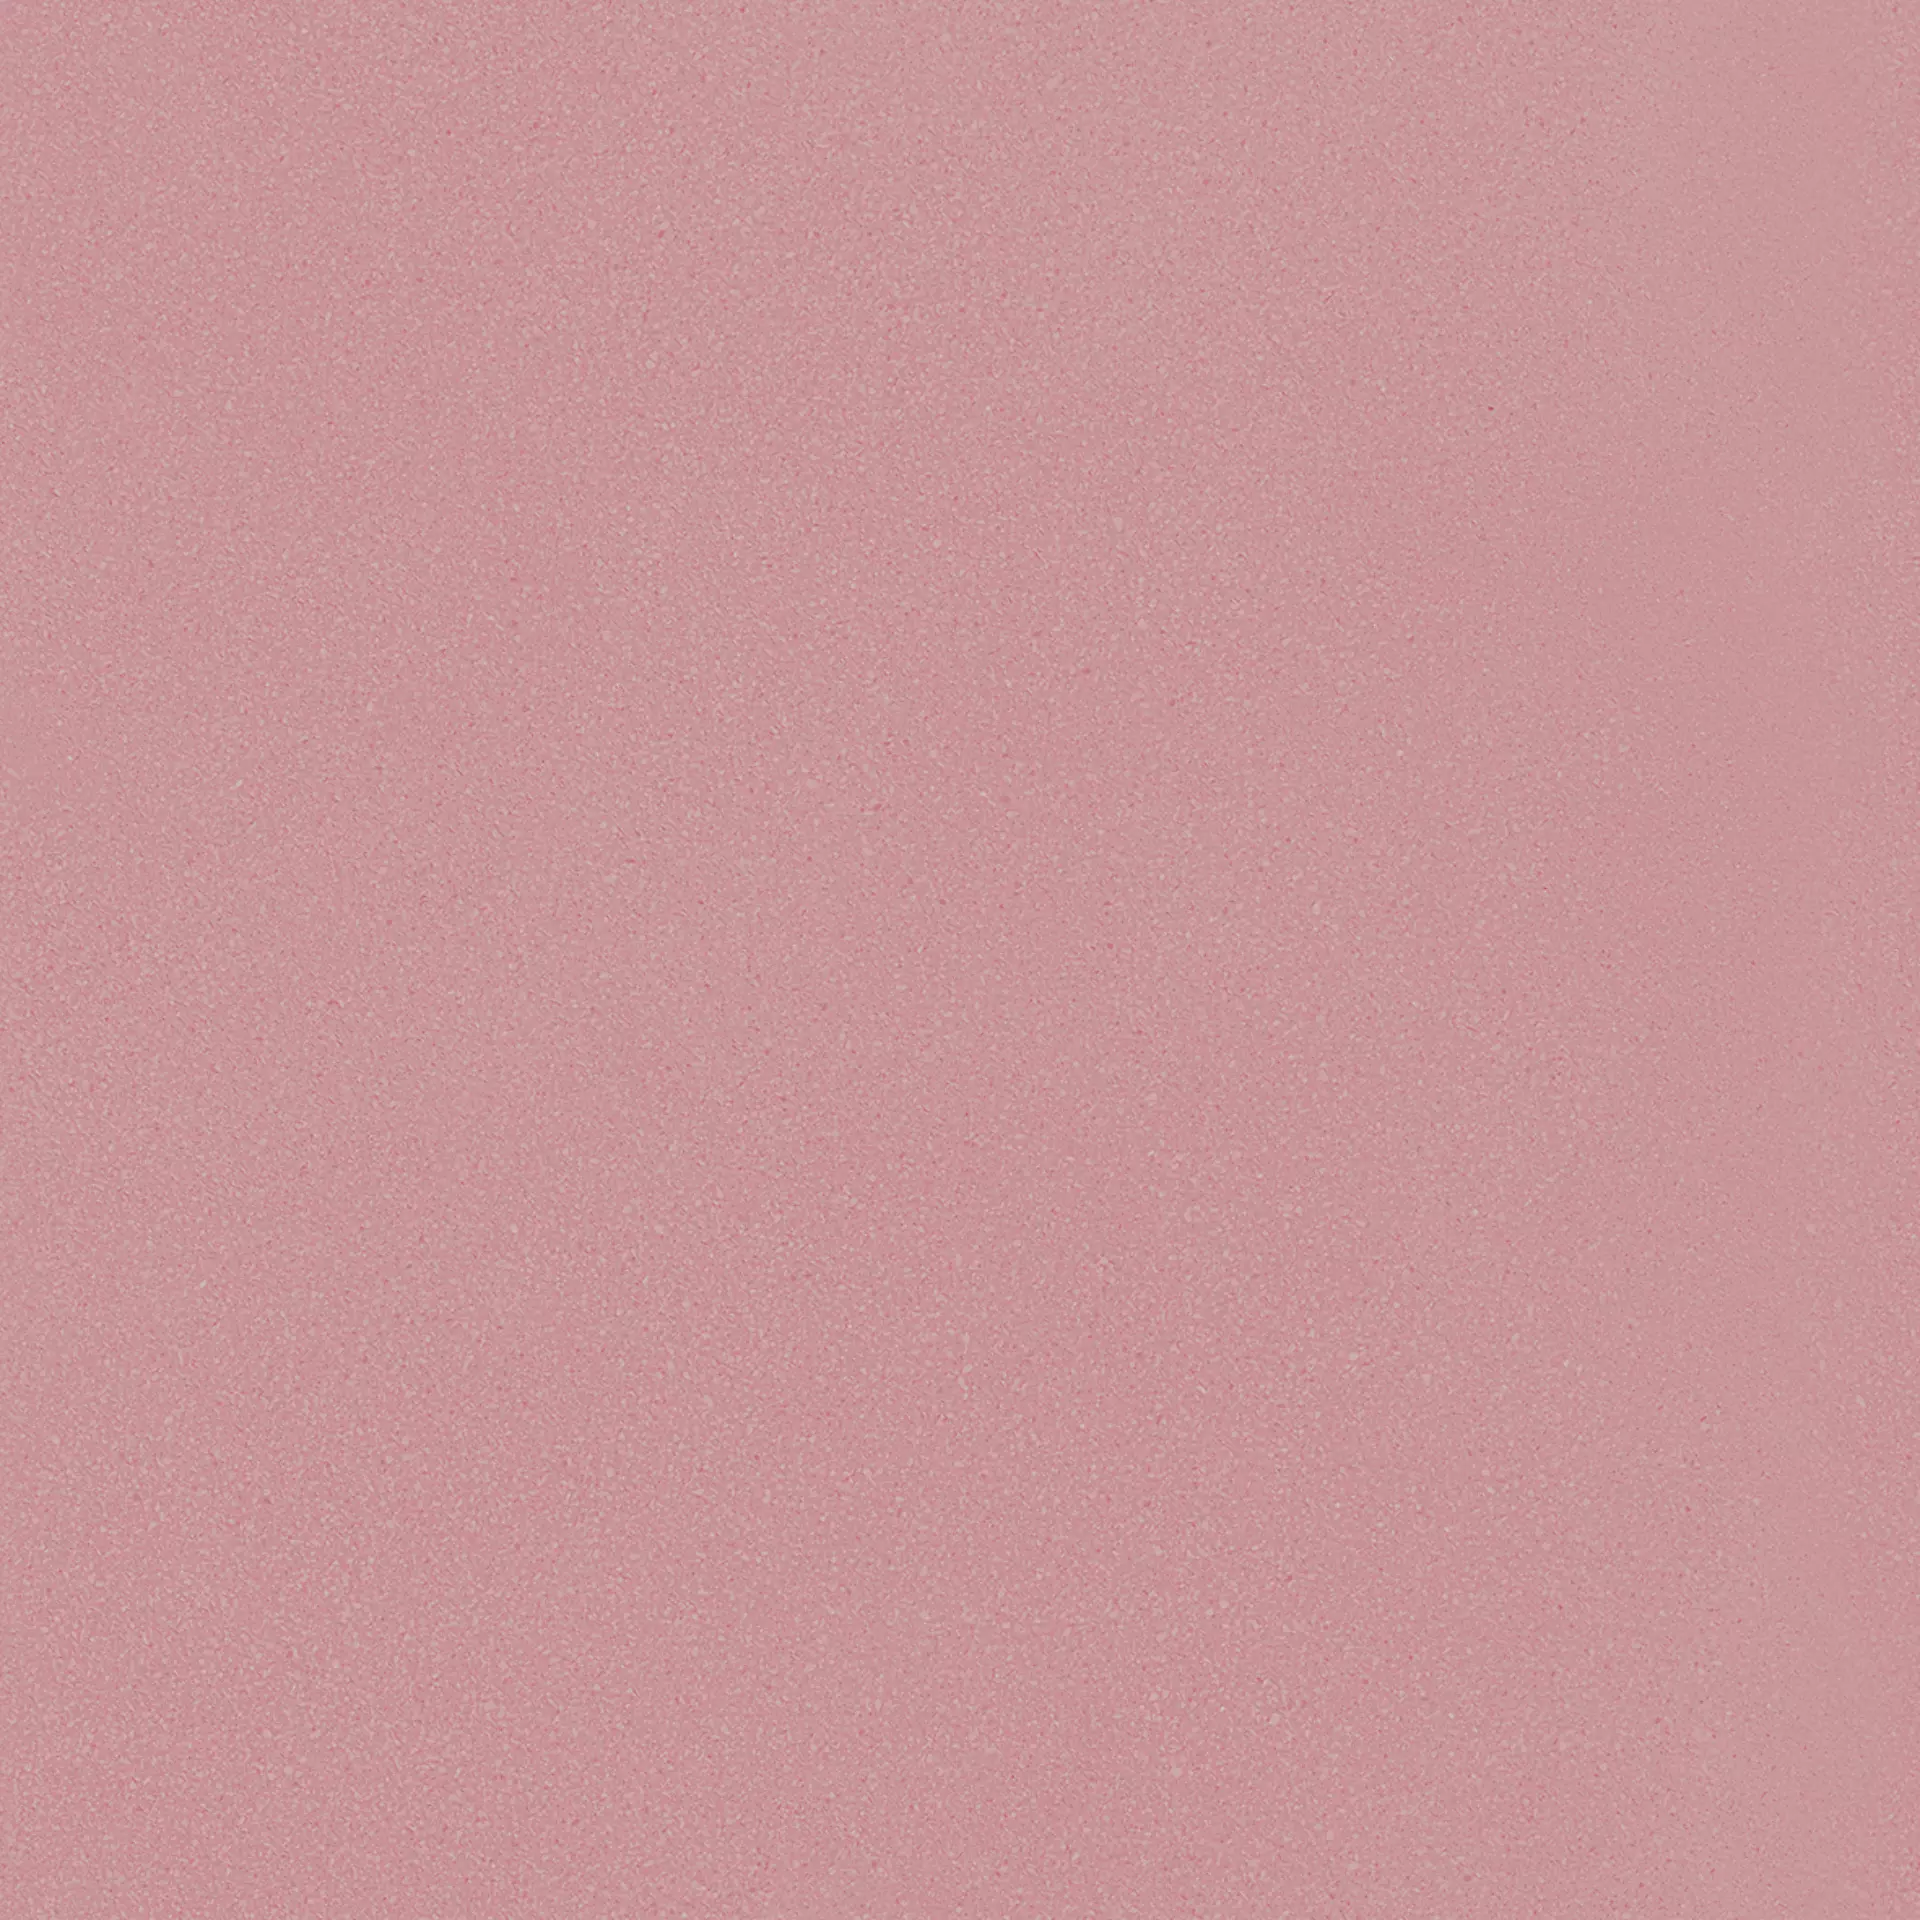 Ergon Medley Minimal Light Pink Naturale EH6Y 60x60cm rectified 9,5mm